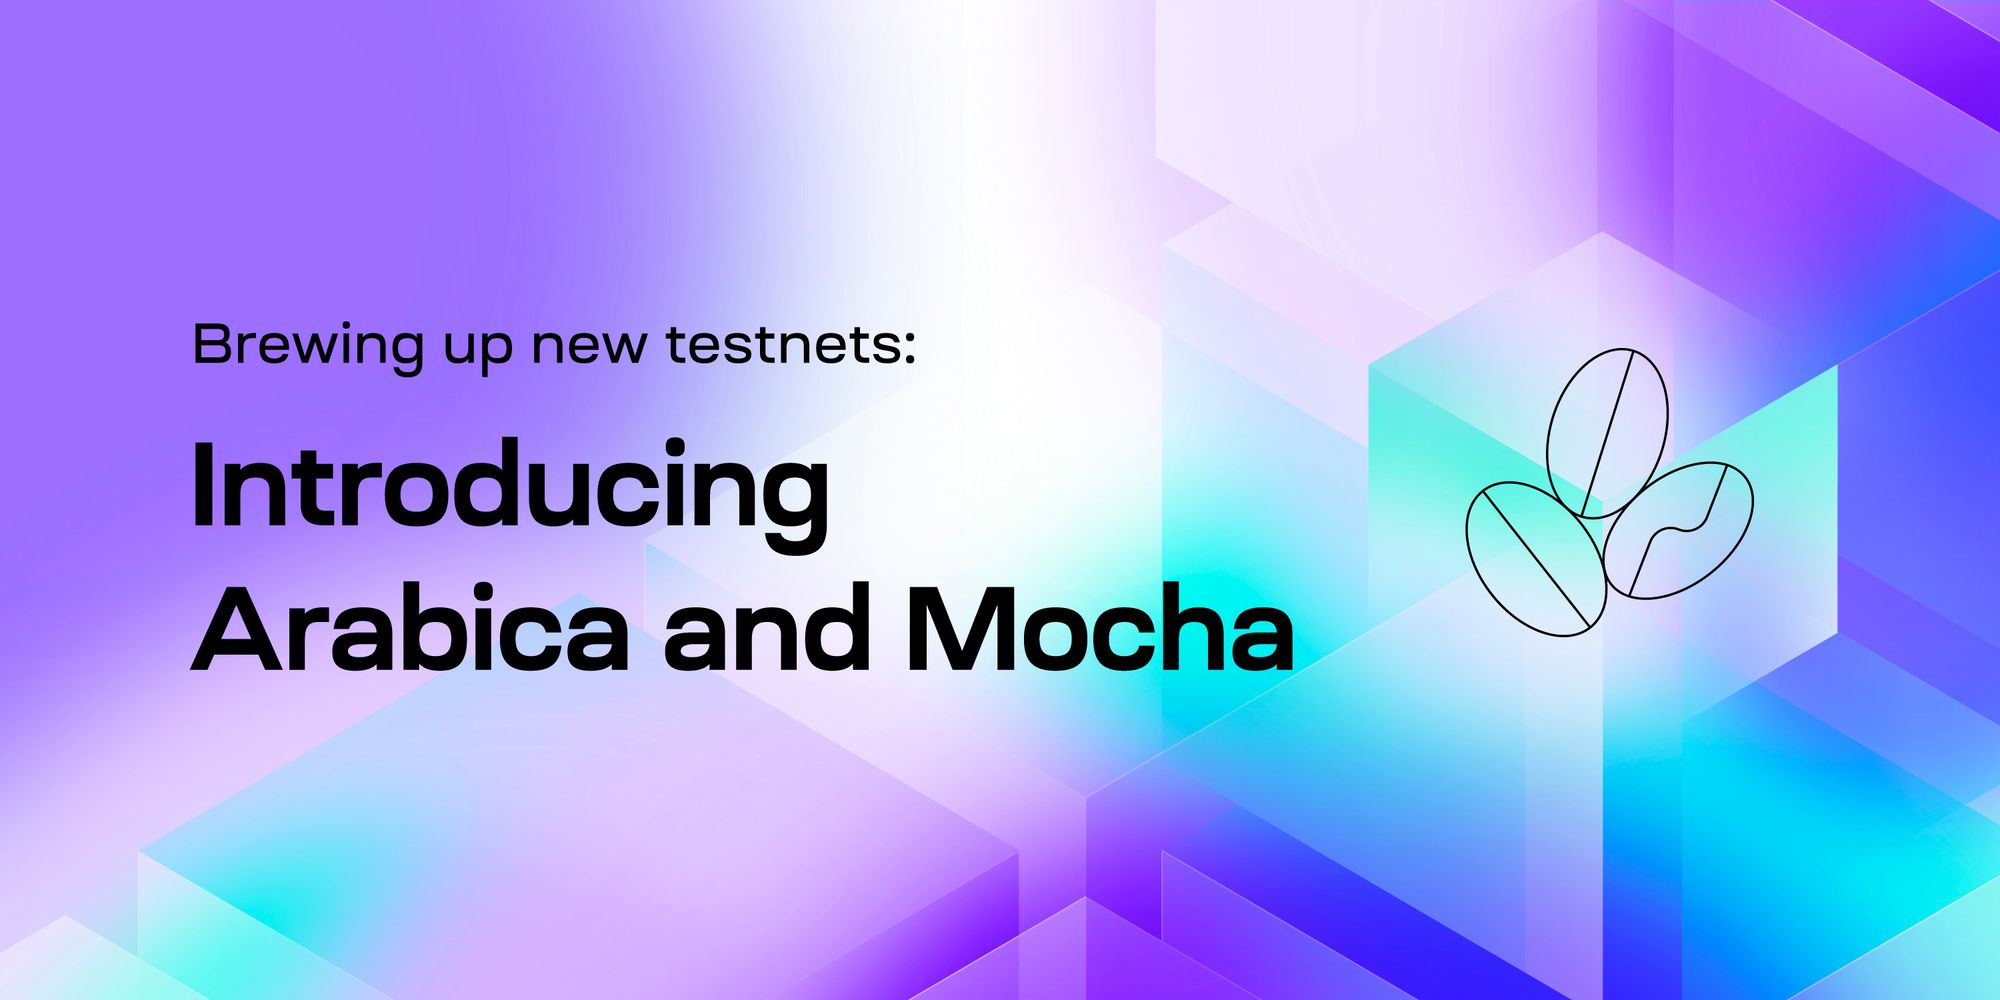 Brewing up new testnets: introducing Arabica and Mocha